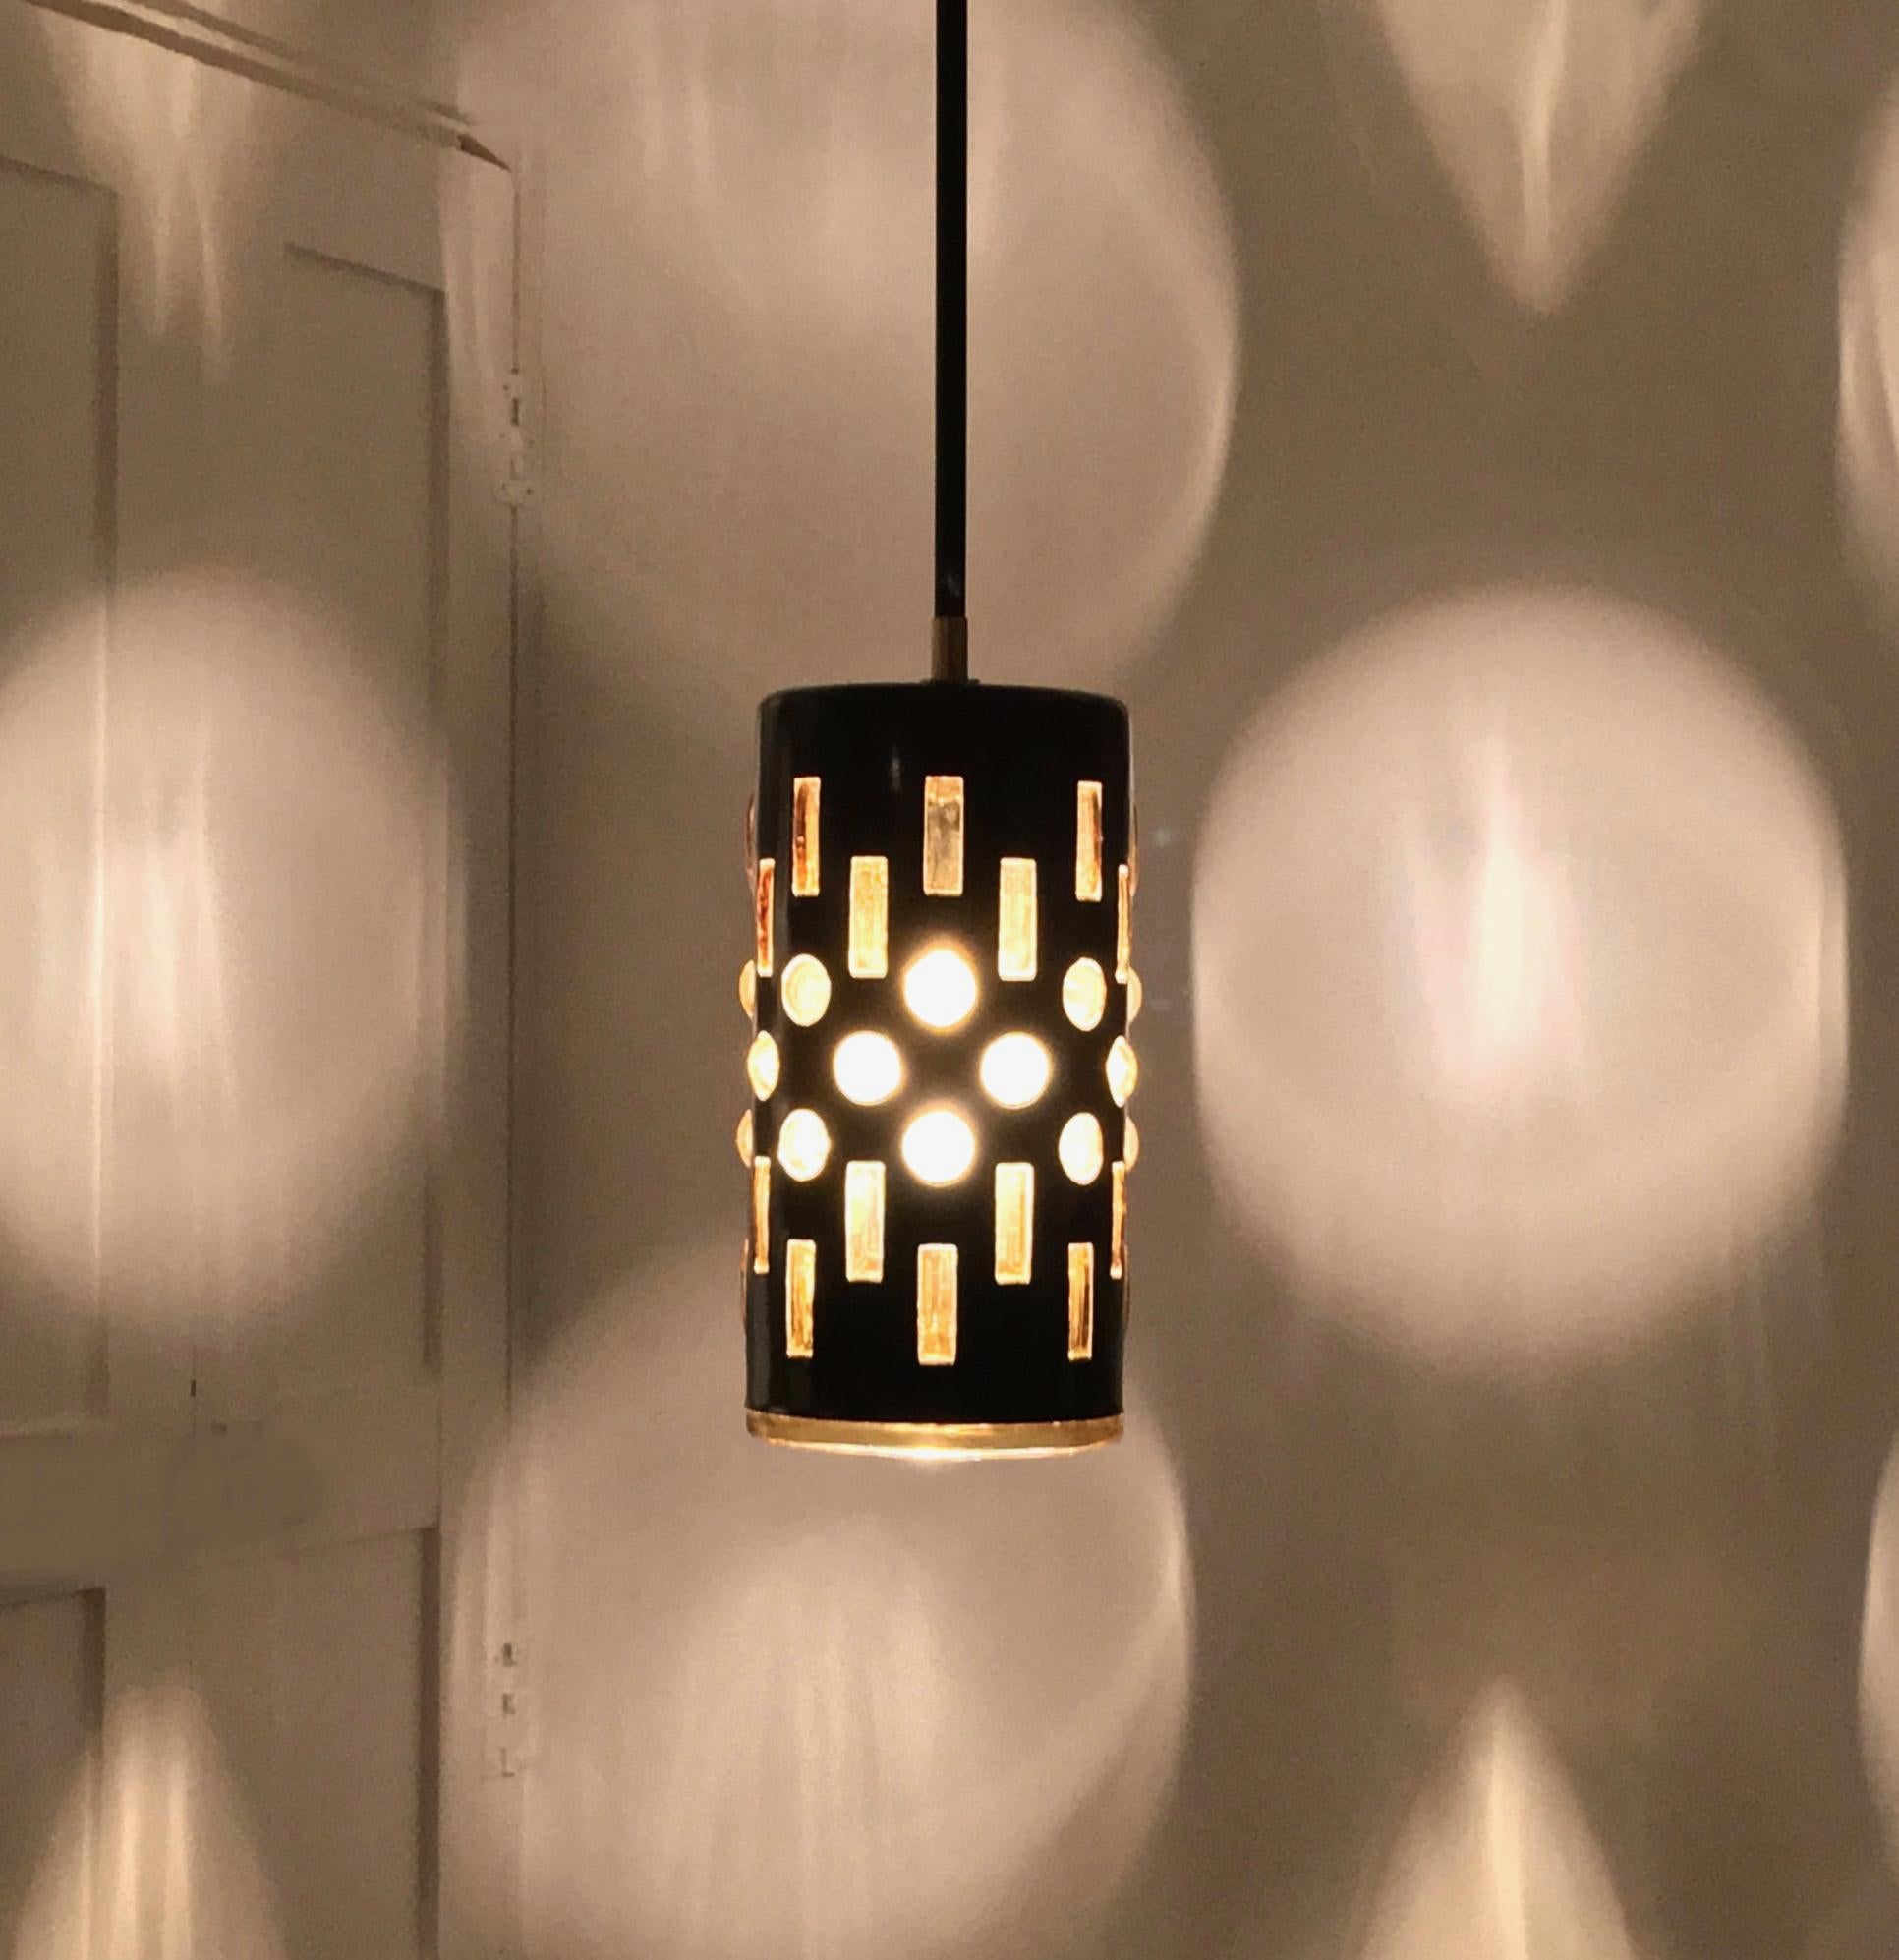 Pendant light or lantern made up of an amber-colored caged glass lining, blown into a deep blue/black enameled metal shade. European, mid-20th century.

A simple, elegant light, nicely made, which gives a lovely patterned light through the amber